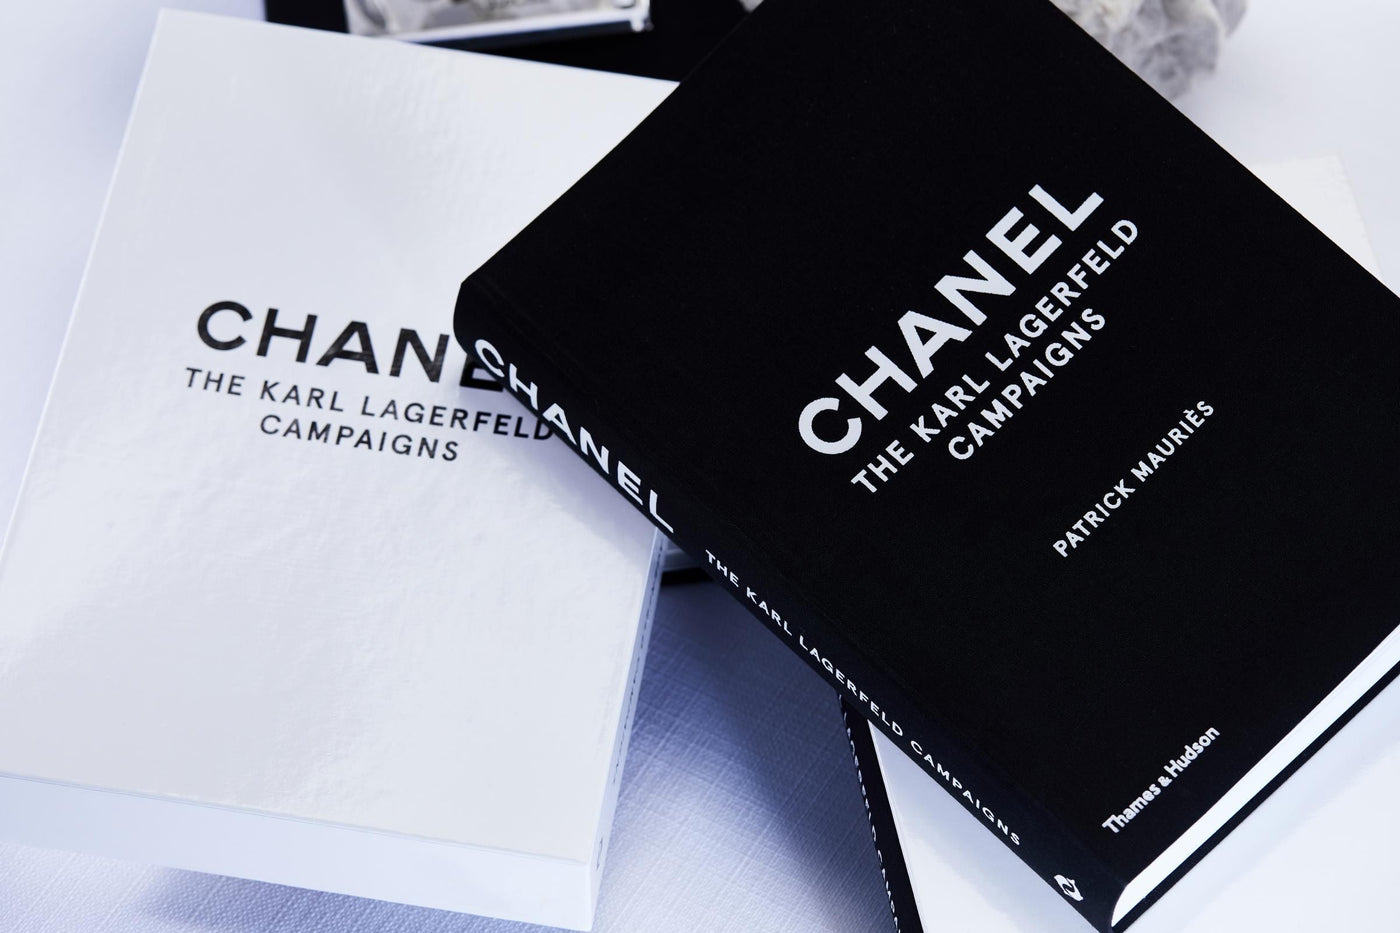 Chanel: The Karl Langerfield Campaigns